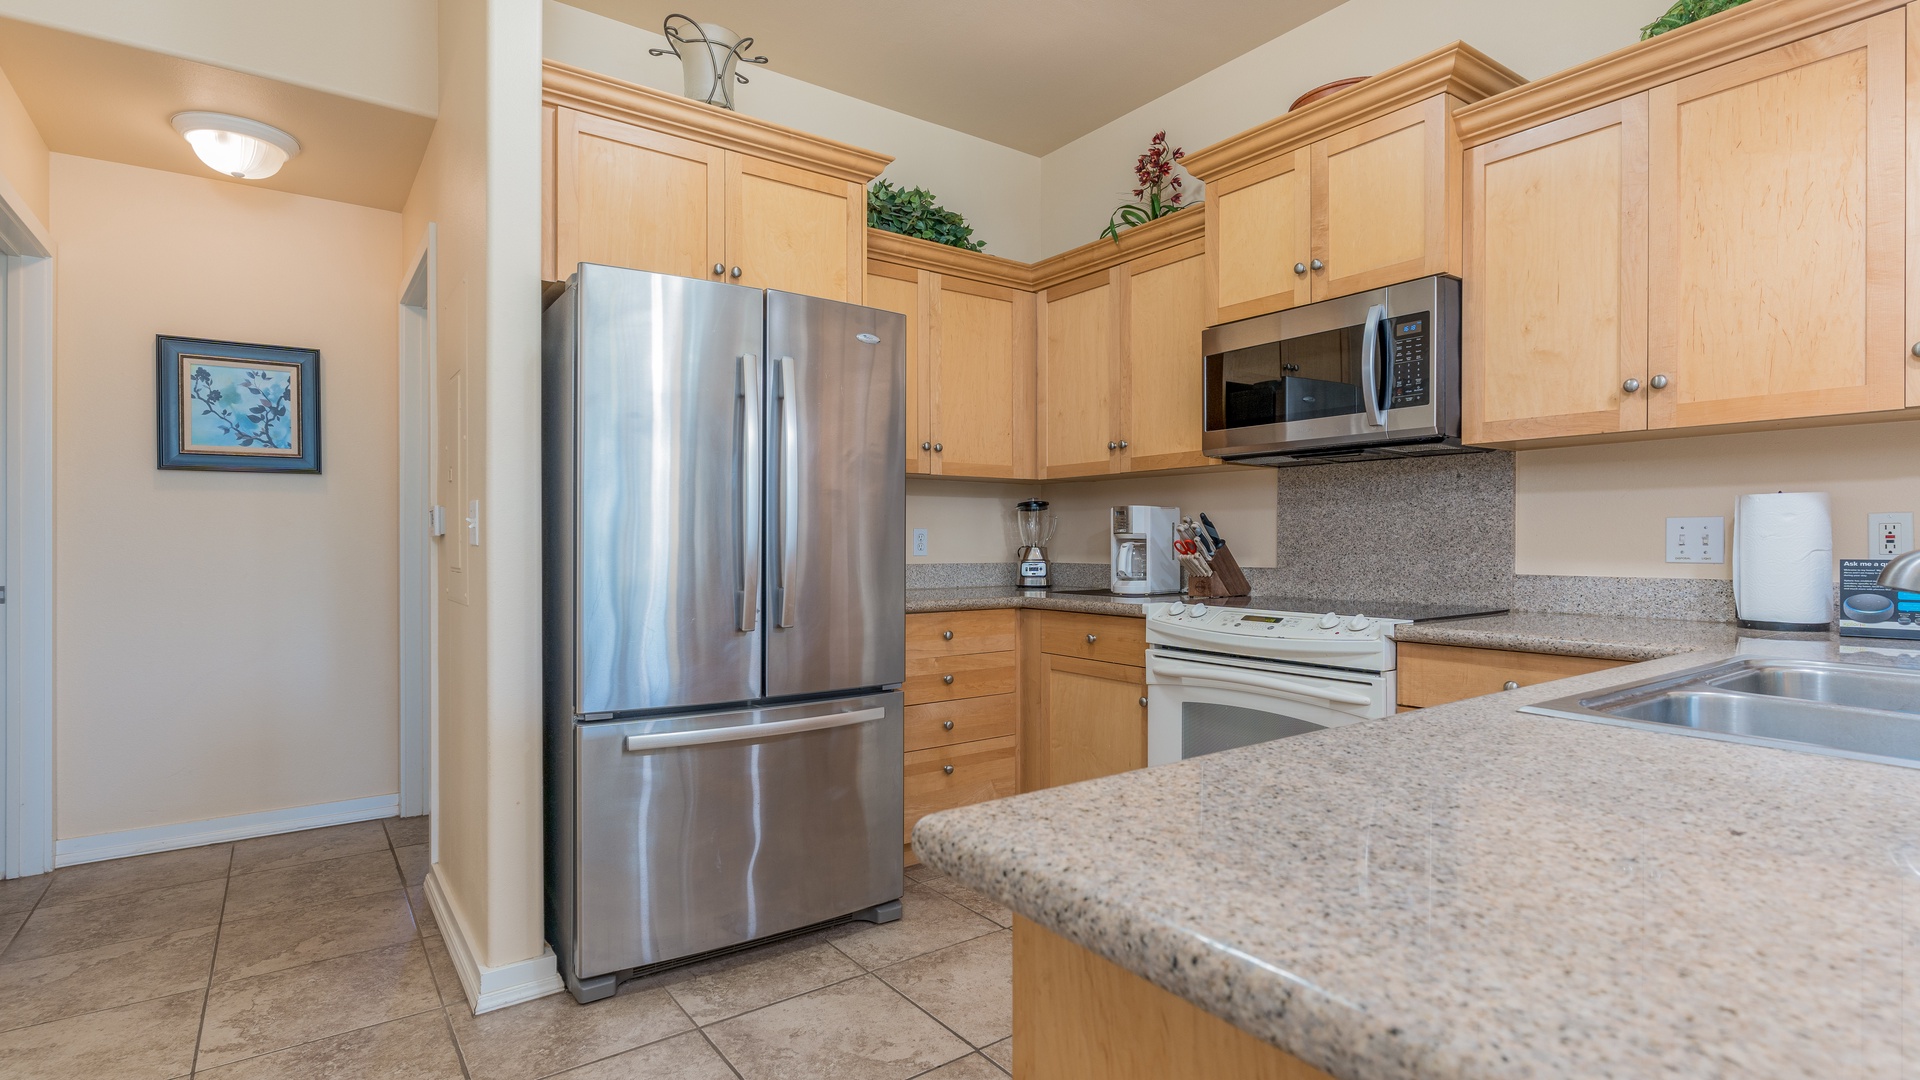 Kapolei Vacation Rentals, Kai Lani 8B - The kitchen is the heart of the home.